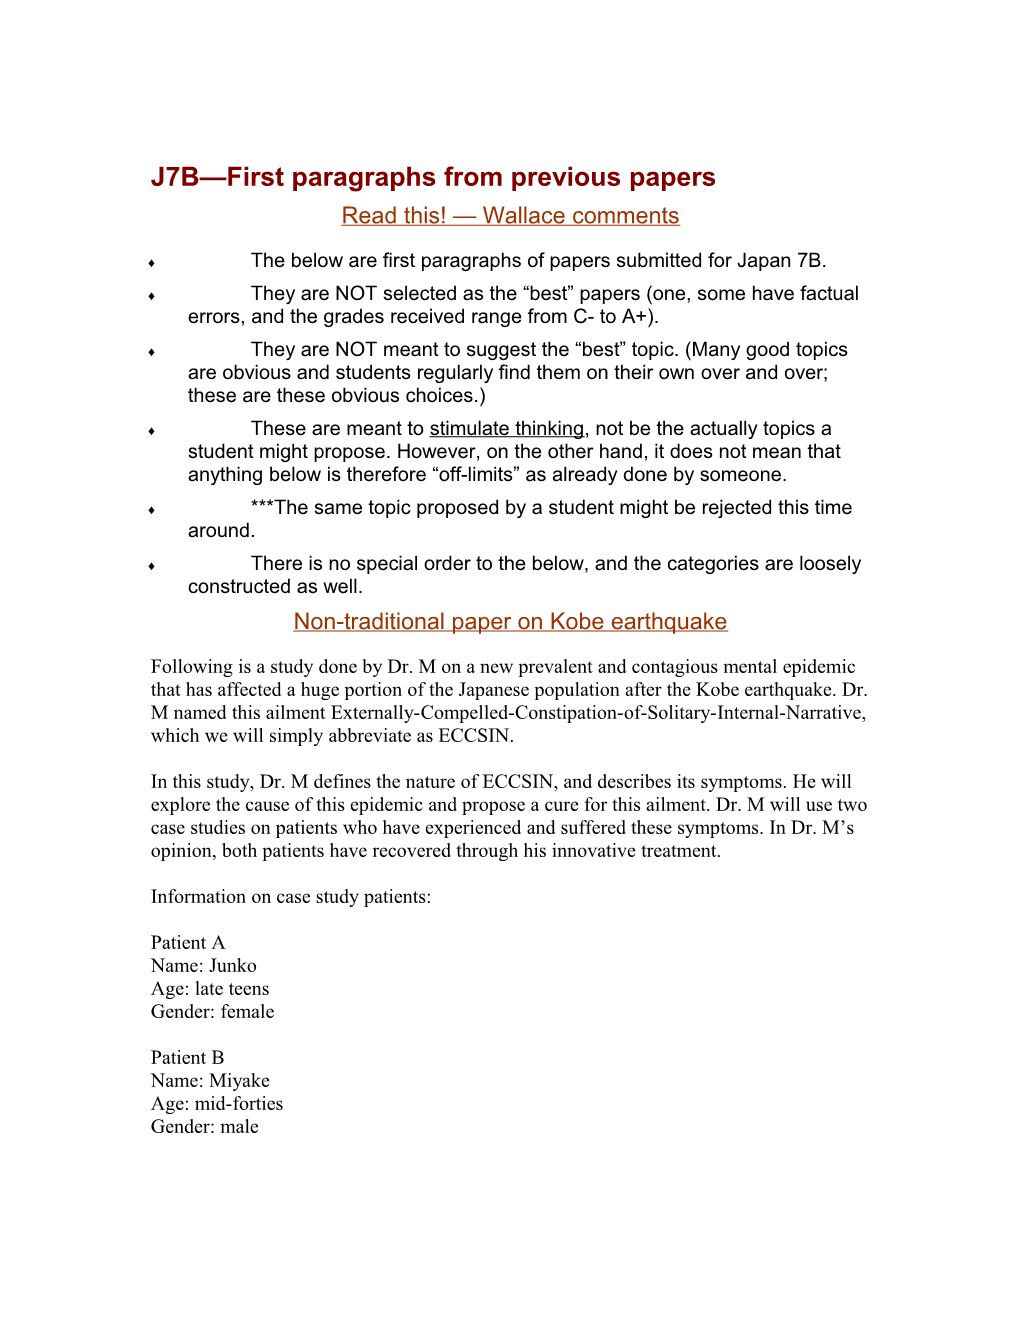 J7B First Paragraphs from Previous Papers